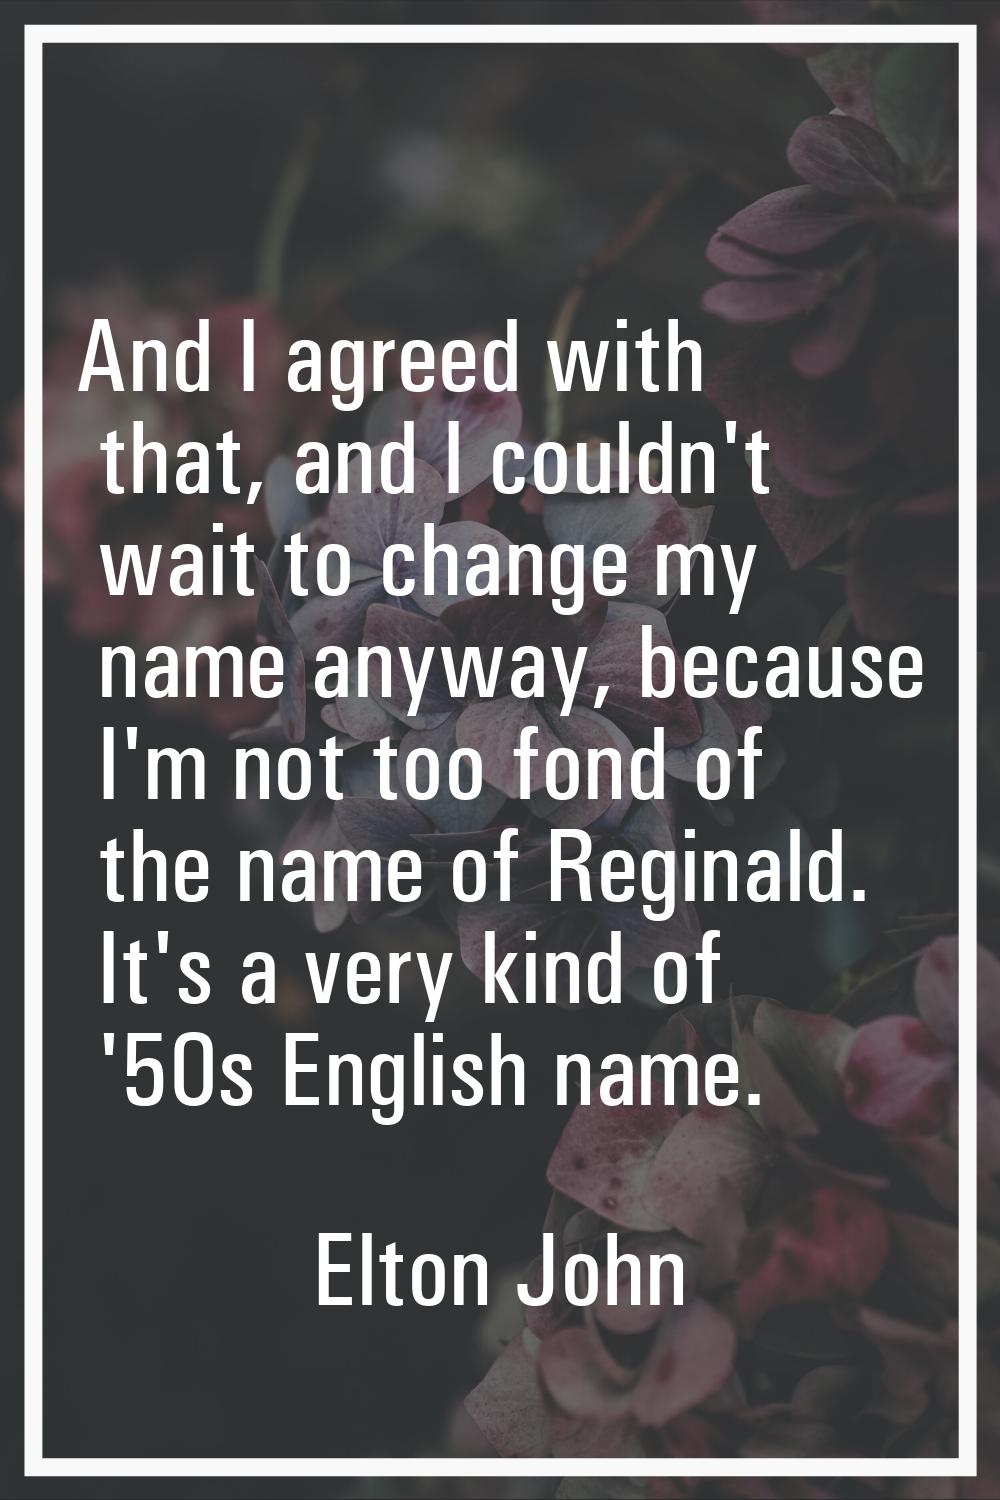 And I agreed with that, and I couldn't wait to change my name anyway, because I'm not too fond of t